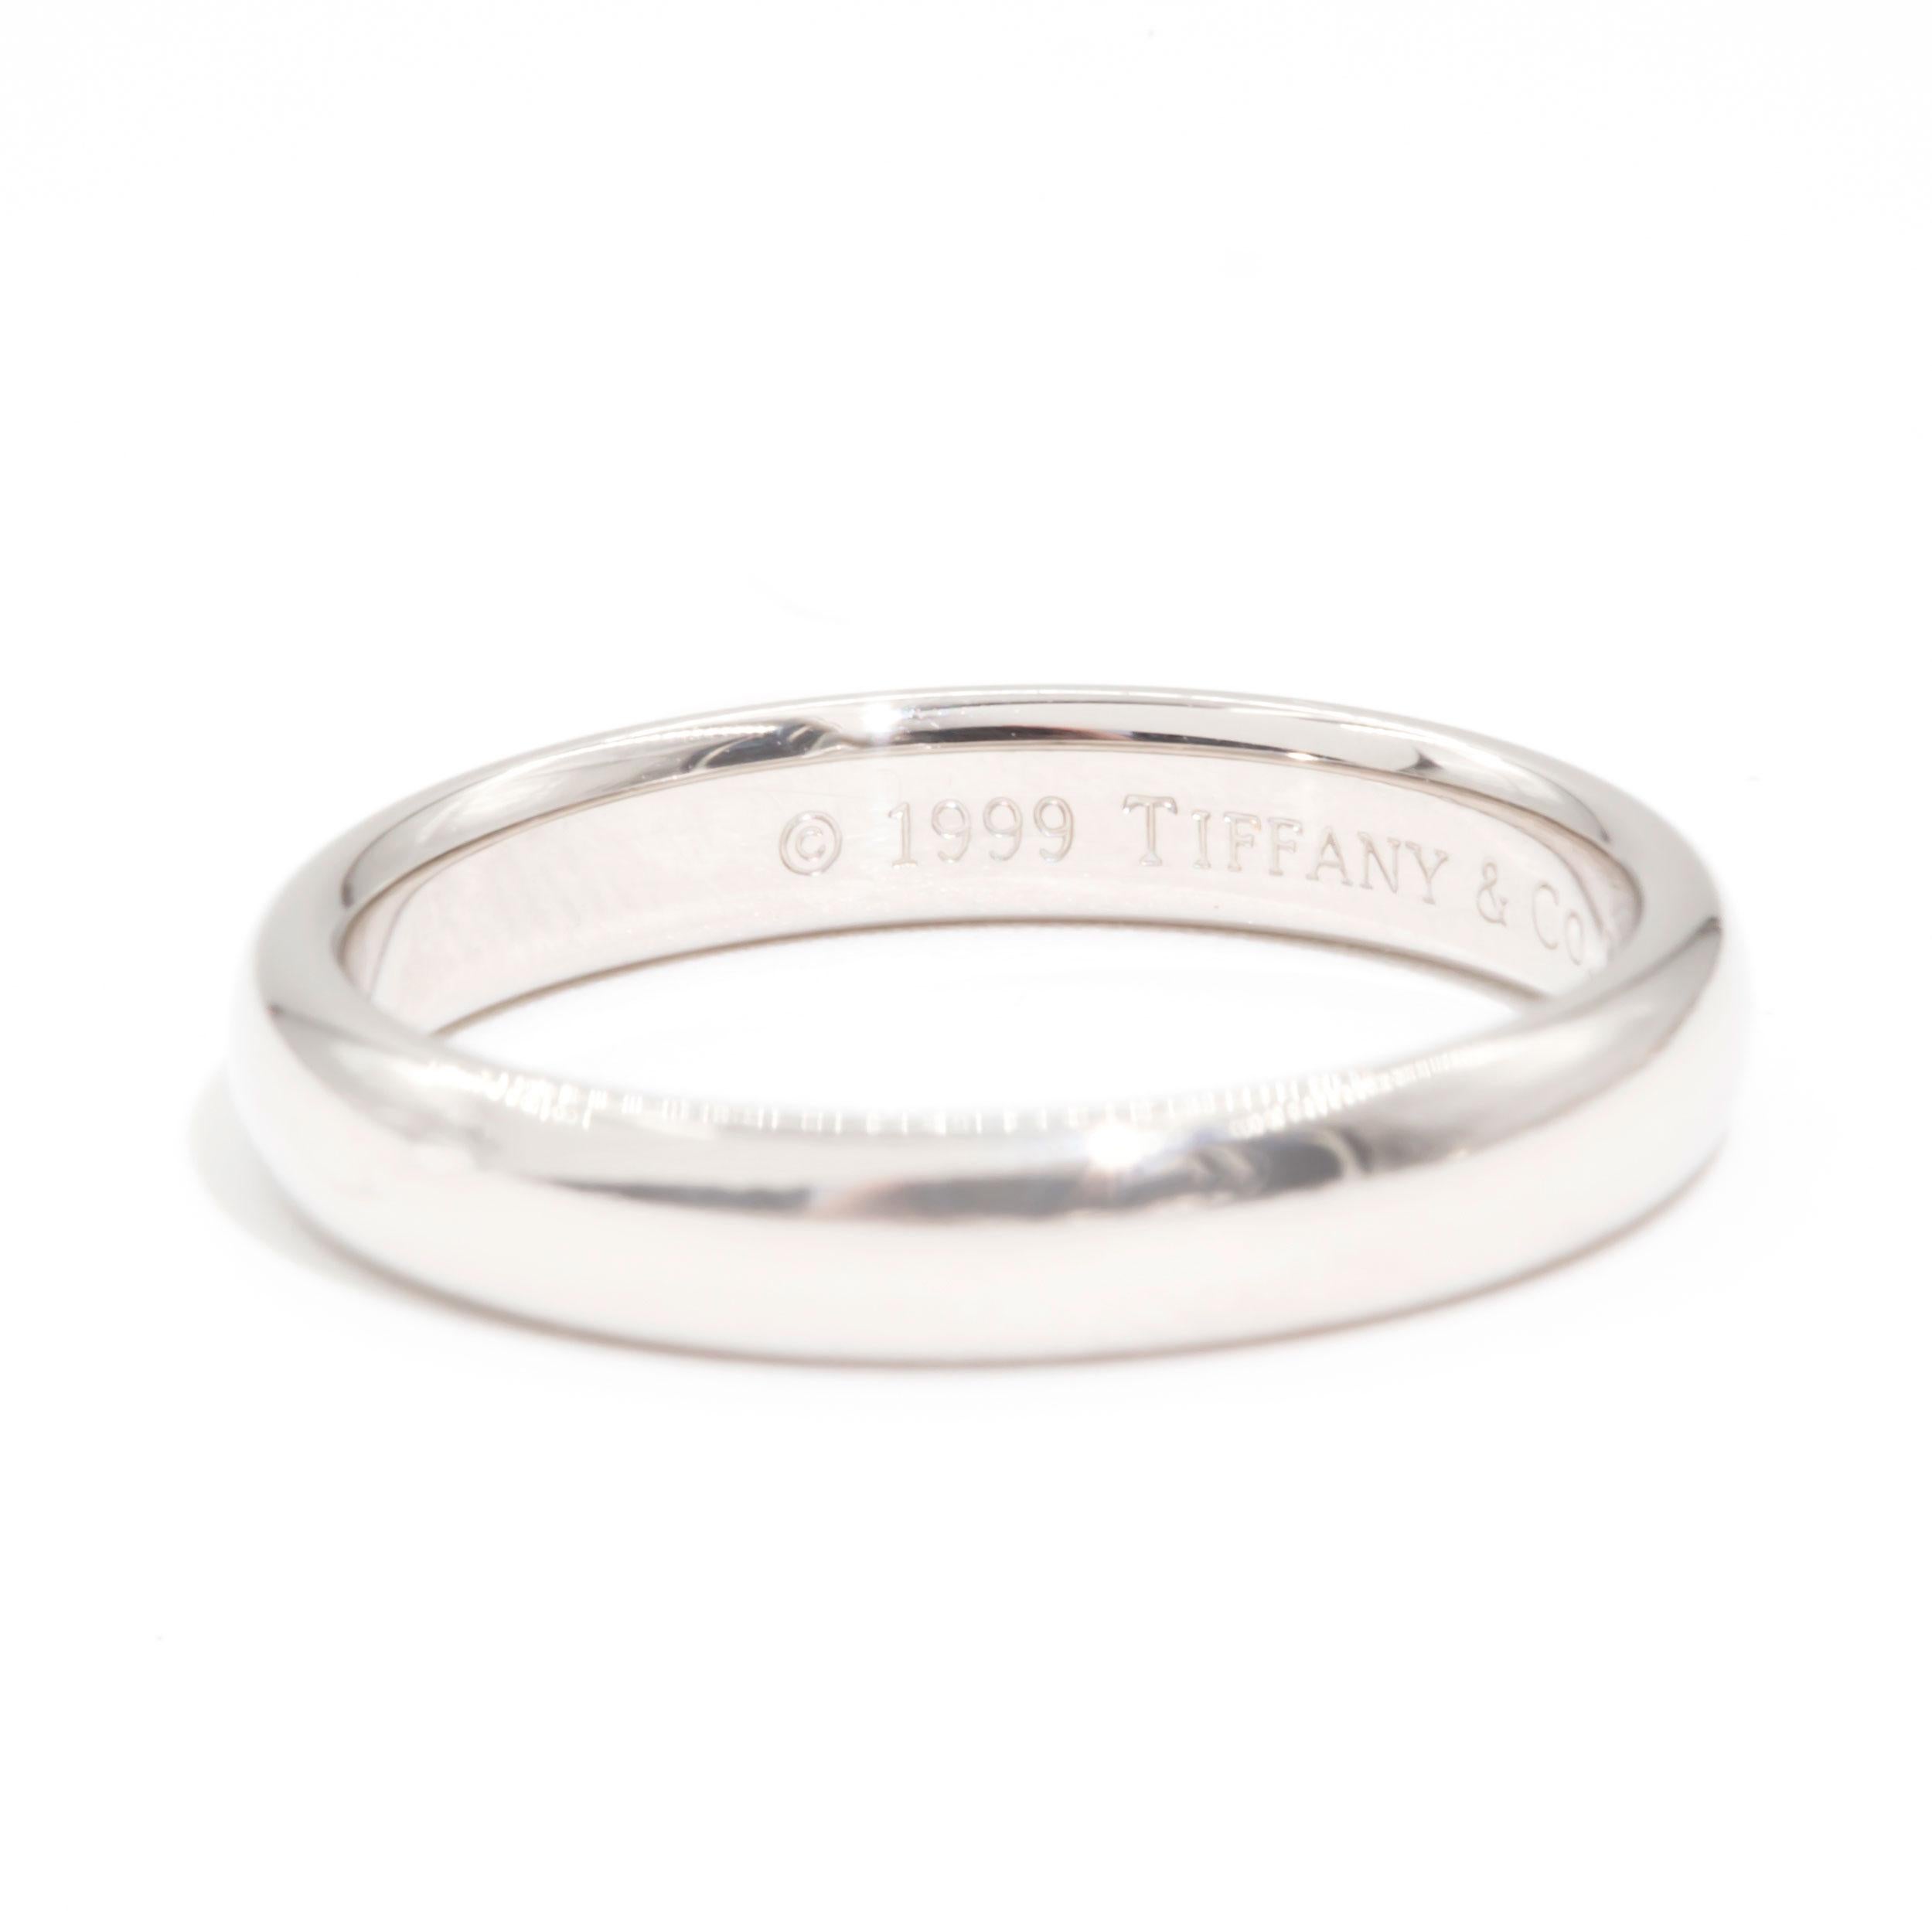 Crafted in Platinum is this genuine Tiffany & Co Tiffany Classic Wedding Band Ring. The Tiffany & Co Tiffany Classic Wedding Band Ring measures 2 millimetres. A simply well made solid band that will last the test of time.  

Ring Size 
J (UK,